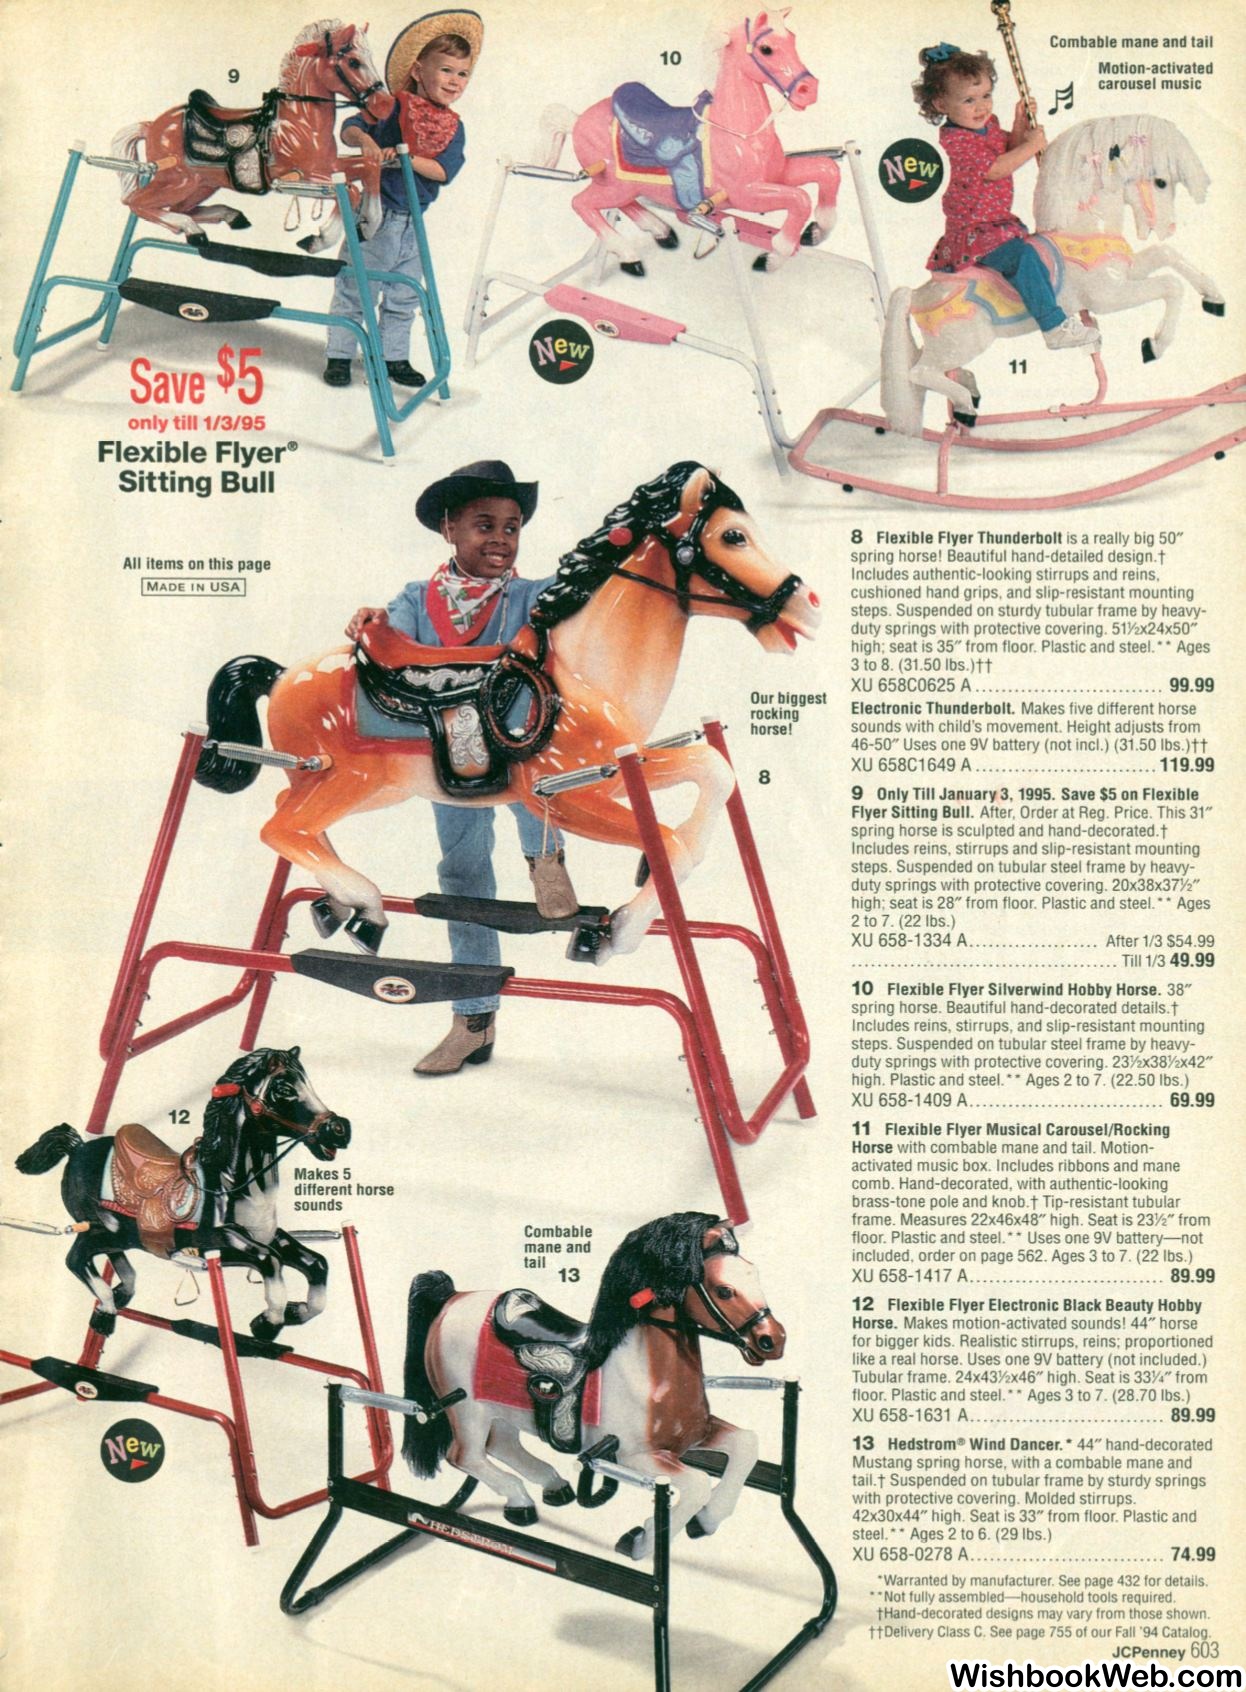 25 Pages Of The 1994 JC Penny Catalog That Will Make You Feel Like You Traveled Through Time